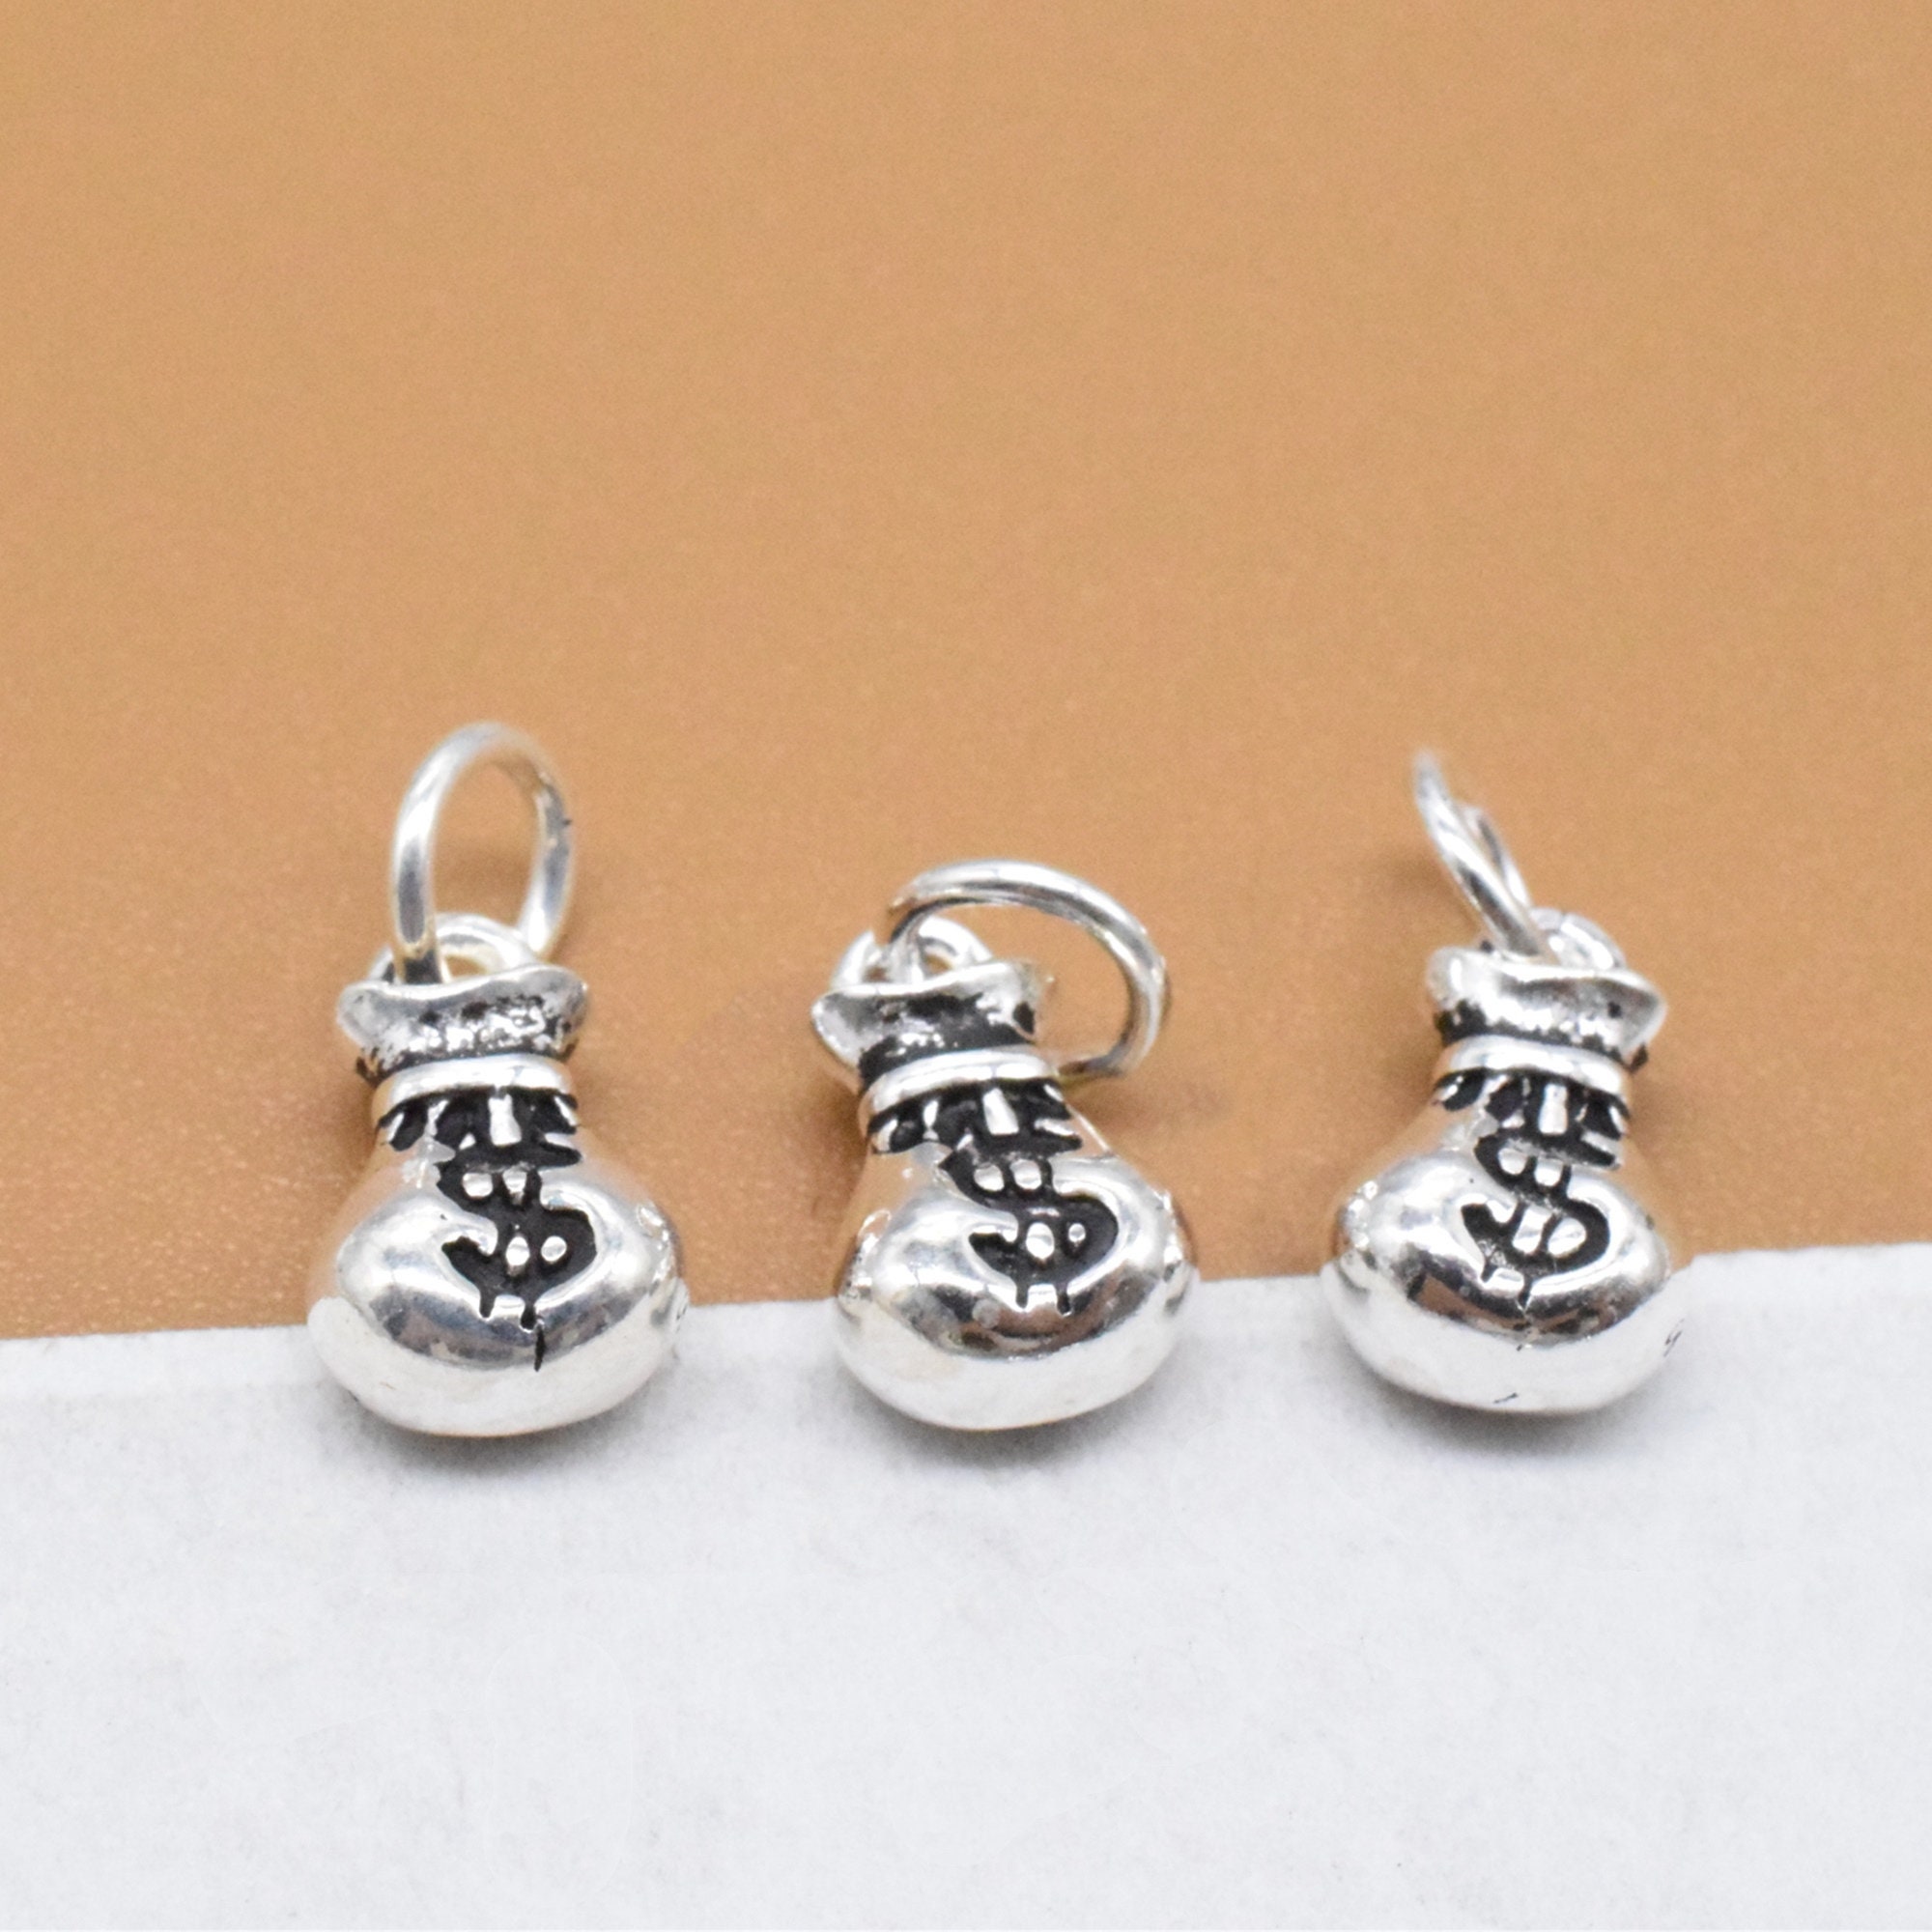 Clearance 3D Cash Bag Charms Money Pouch Charm Coin Purse Charm (6pcs / 6mm x 15mm / Tibetan Silver / 2 Sided) Dollar Wealth Wealthy Charm CHM1775